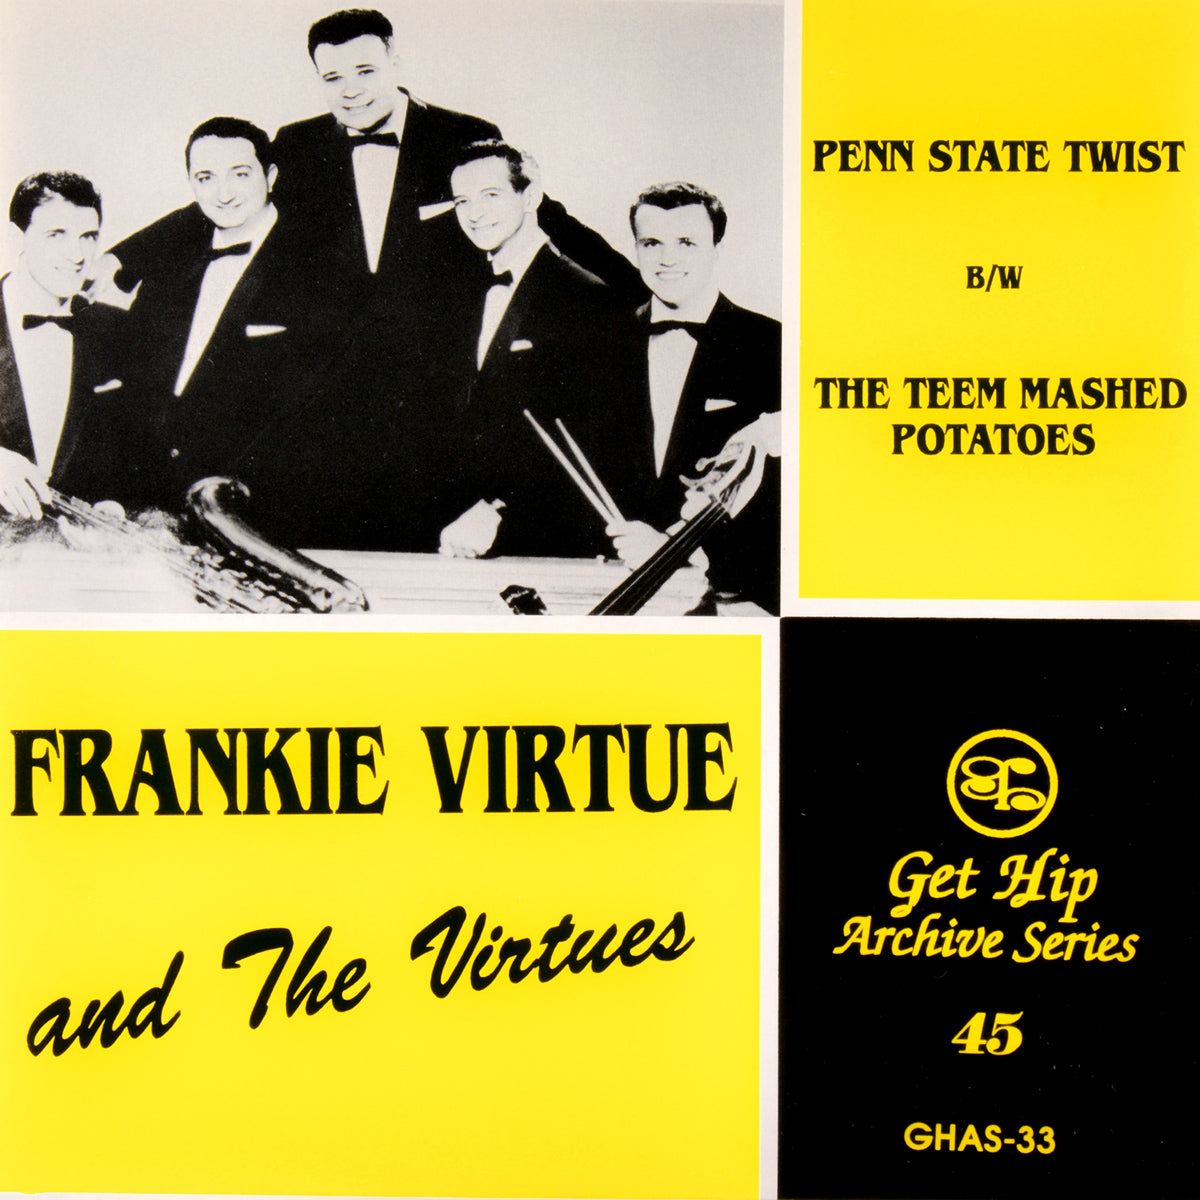 Frankie Virtue And The Virtues- Penn State Twist 7” ~REISSUE!